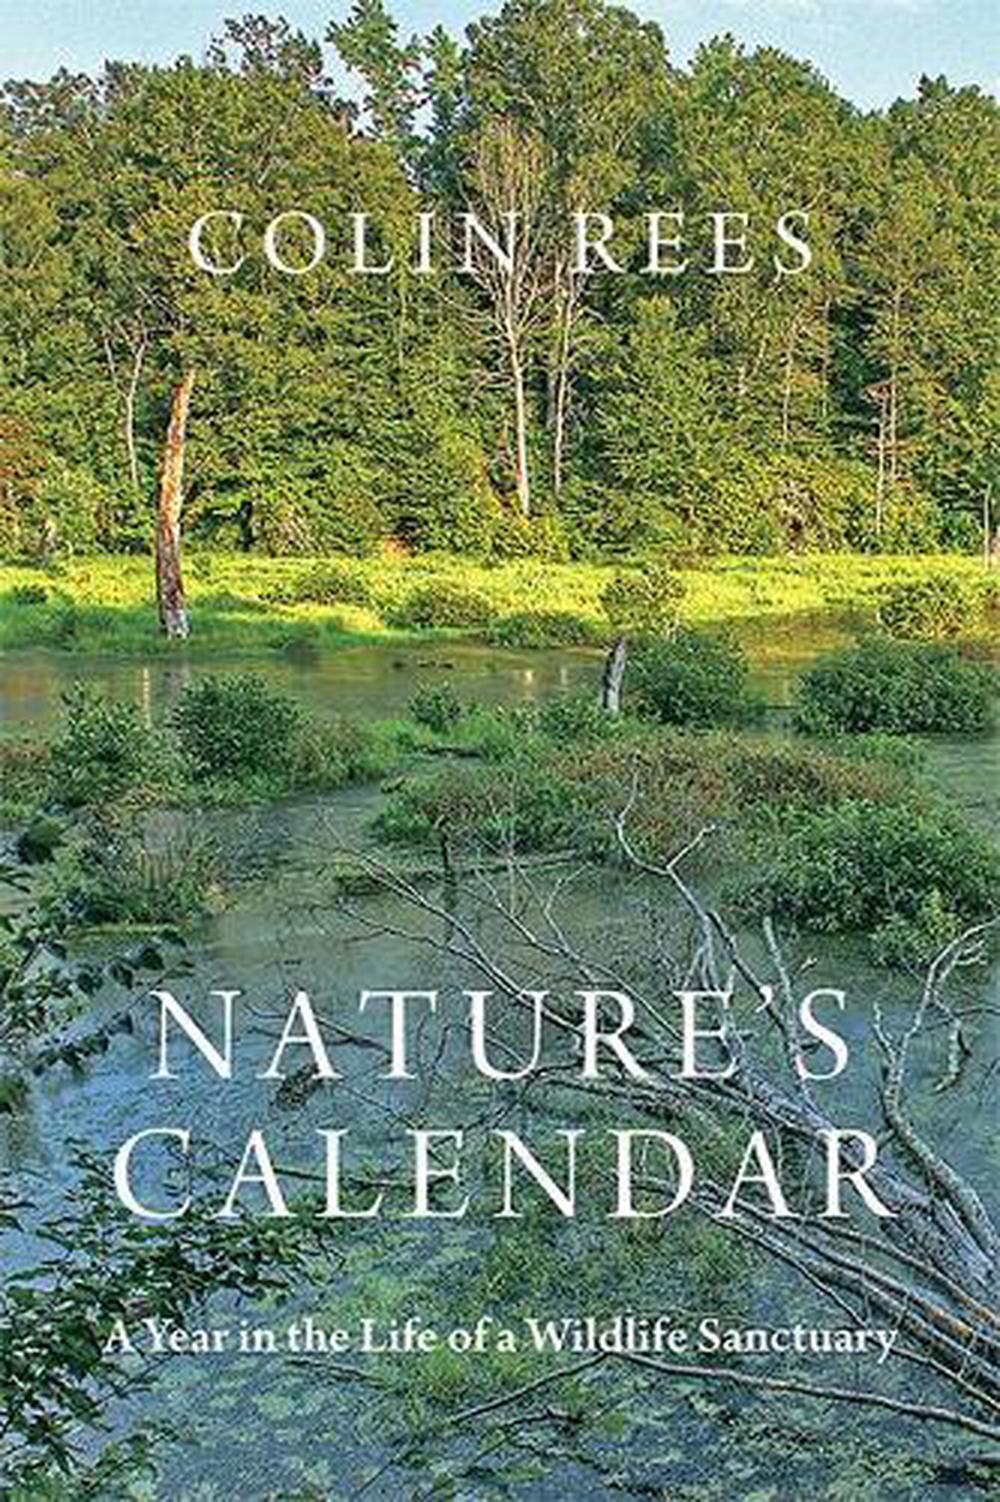 nature-s-calendar-a-year-in-the-life-of-a-wildlife-sanctuary-by-colin-rees-pape-9781421427430